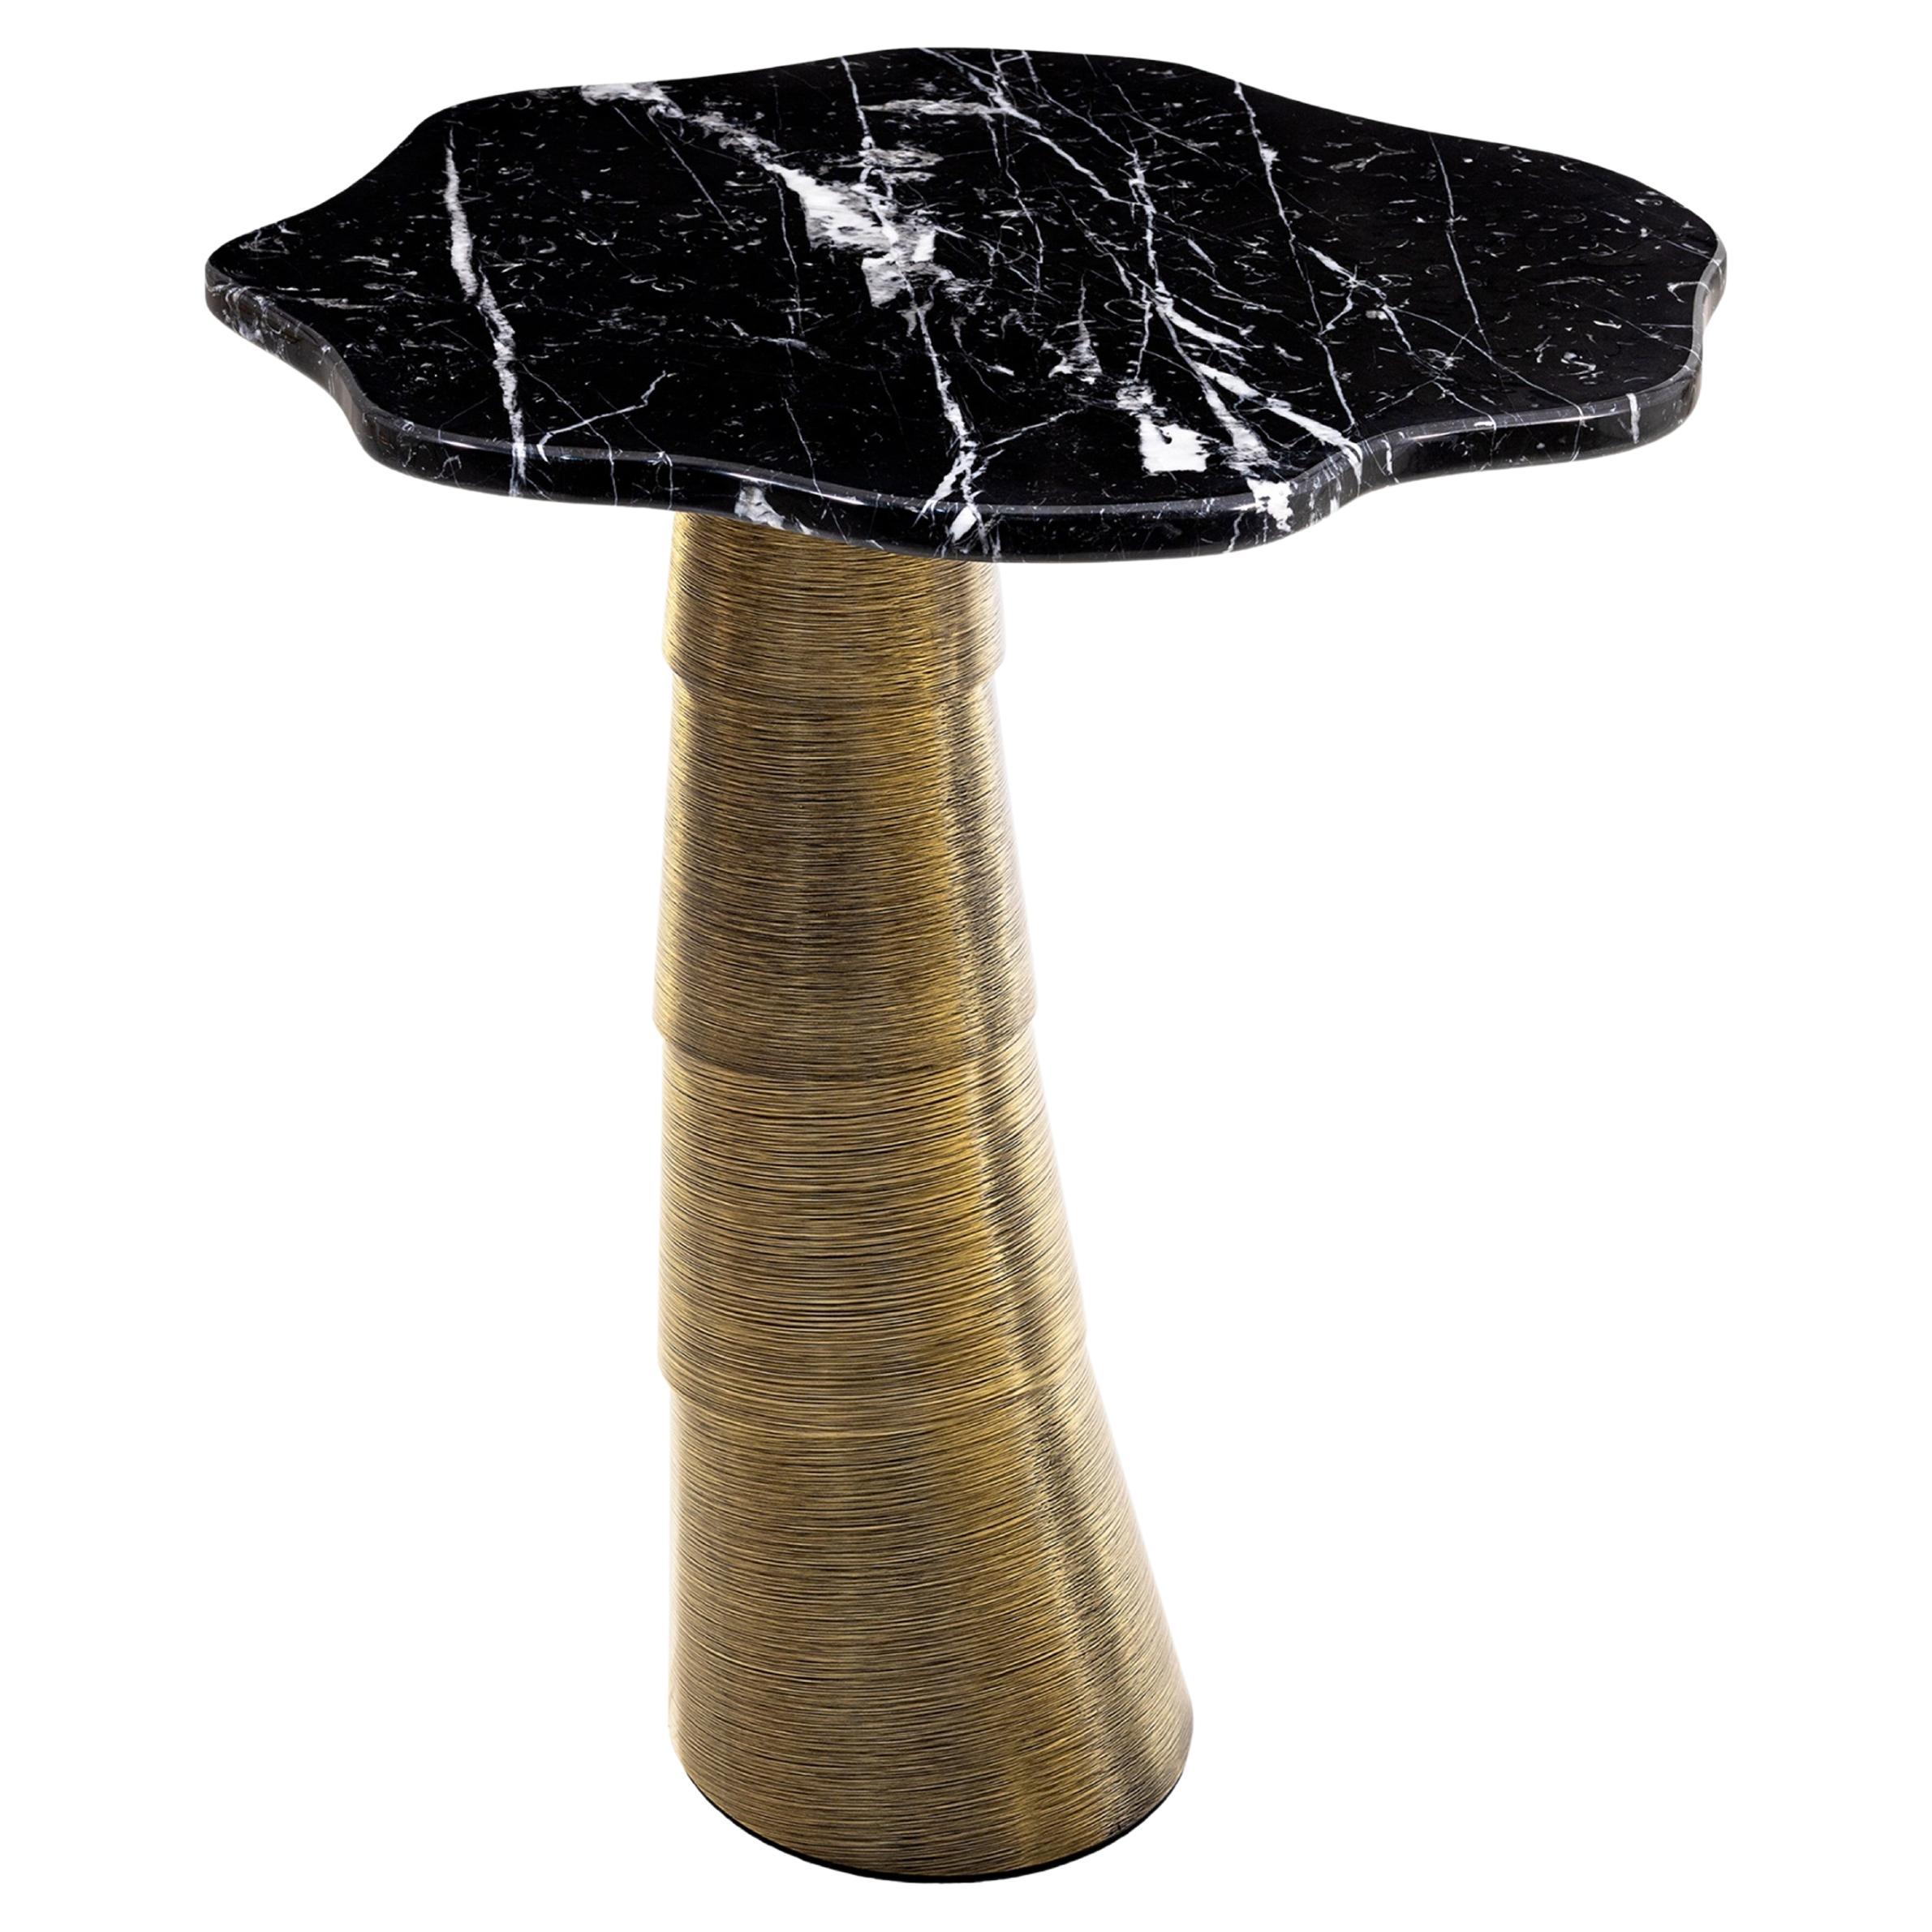 Palm Side Table, Nero Marquina and Brass, InsidherLand by Joana Santos Barbosa For Sale